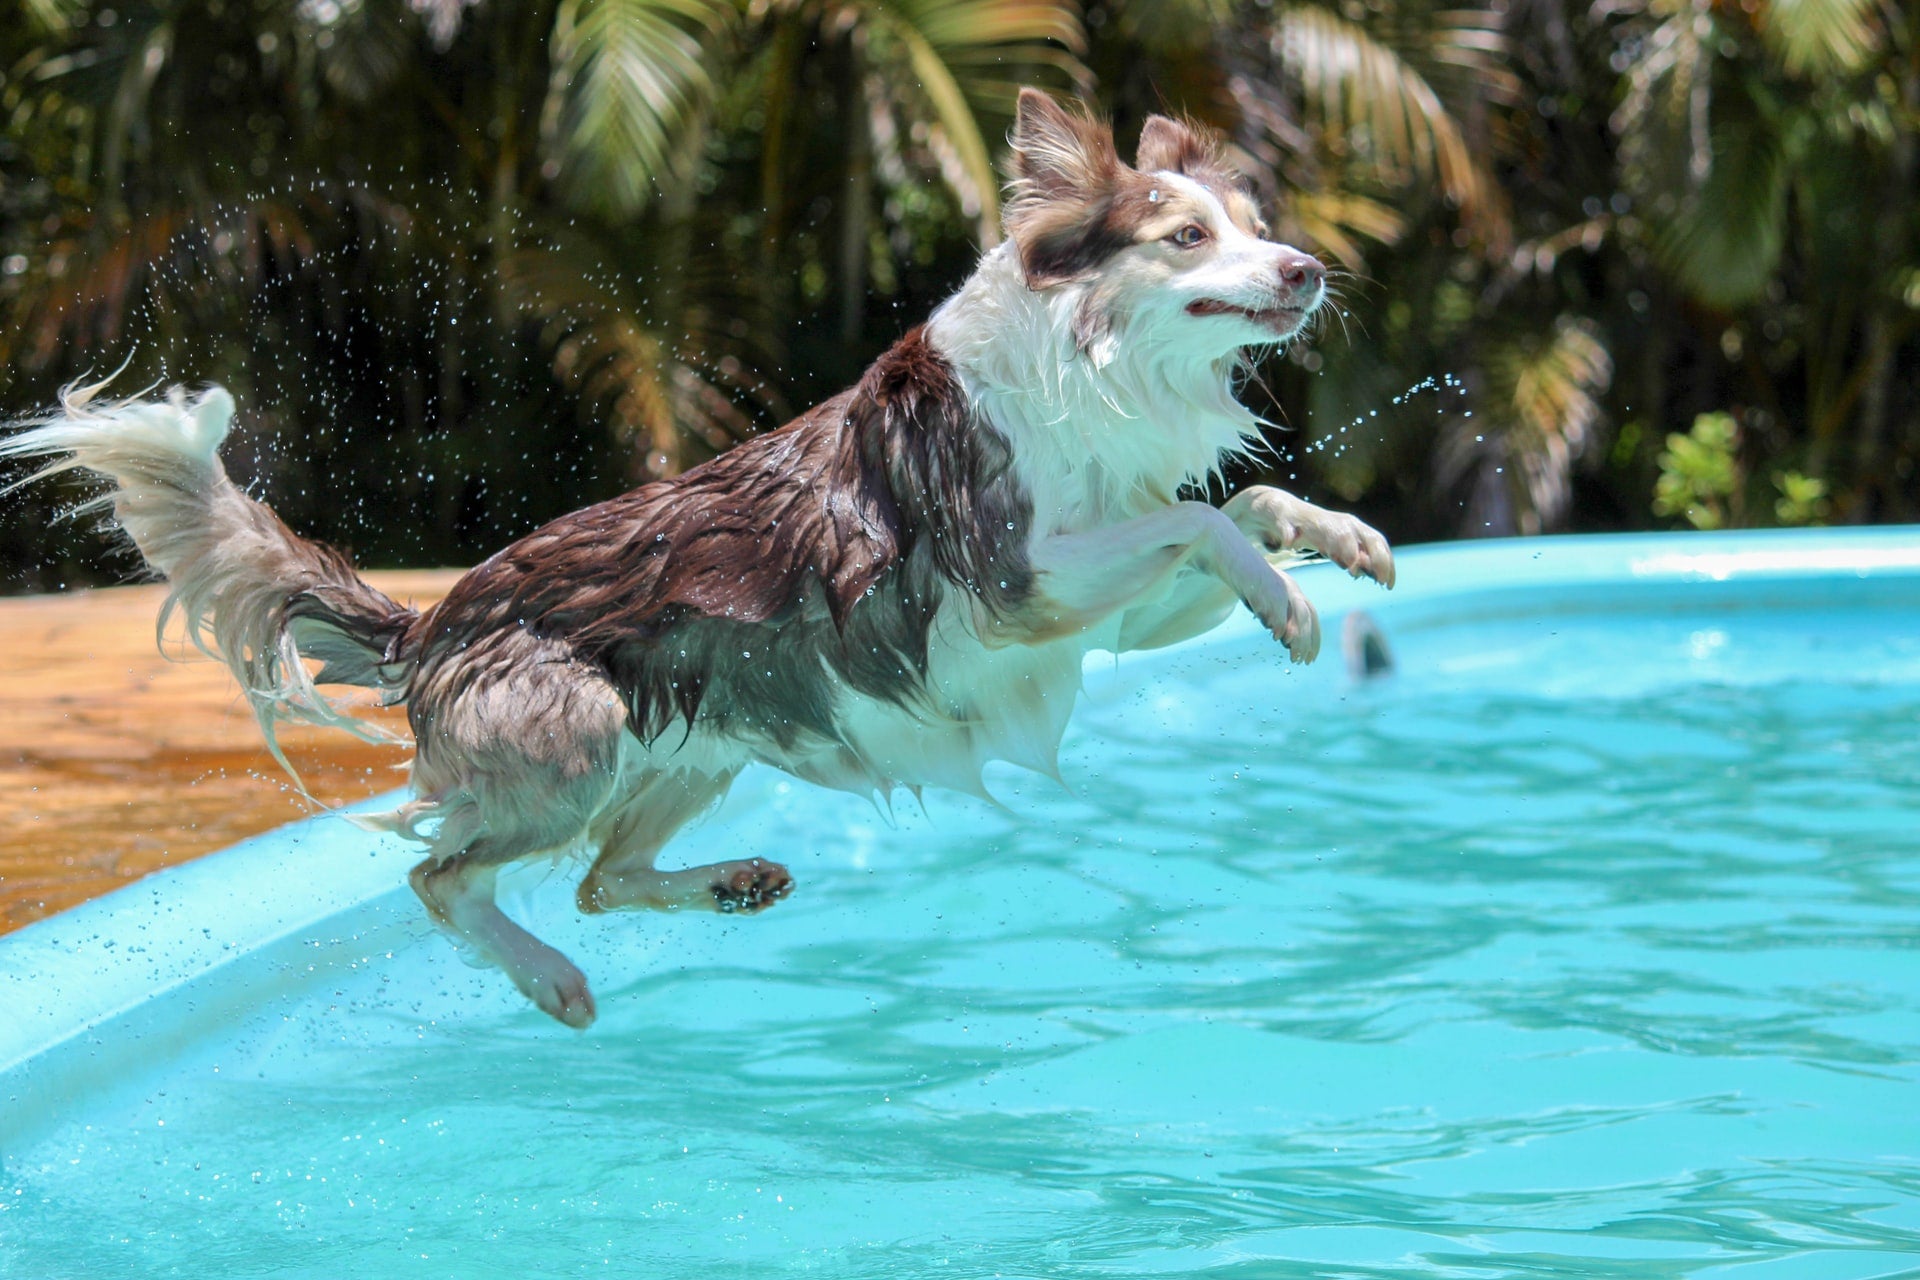 Water Safety for Dogs: How to Keep Your Pup Safe When They're Swimming (in pools, beach, lakes or rivers)